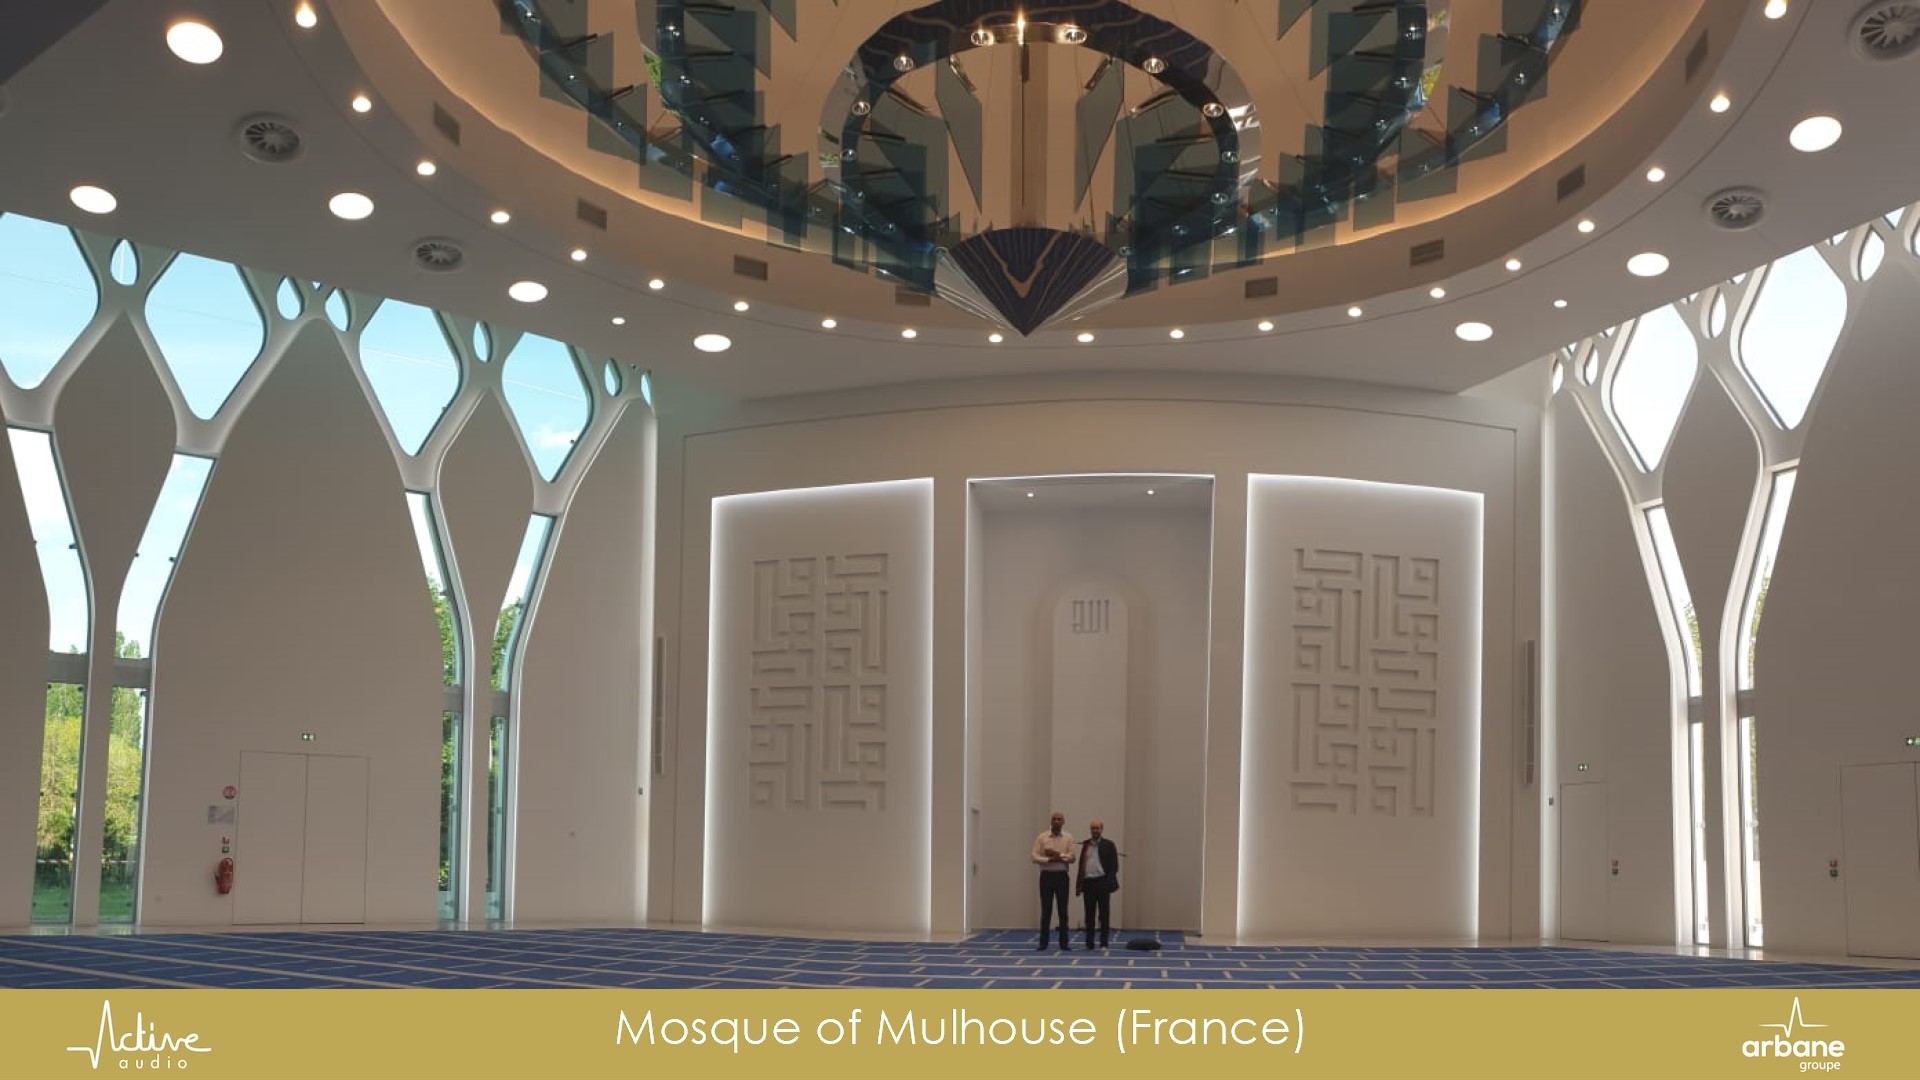 Mosque of Mulhouse, France